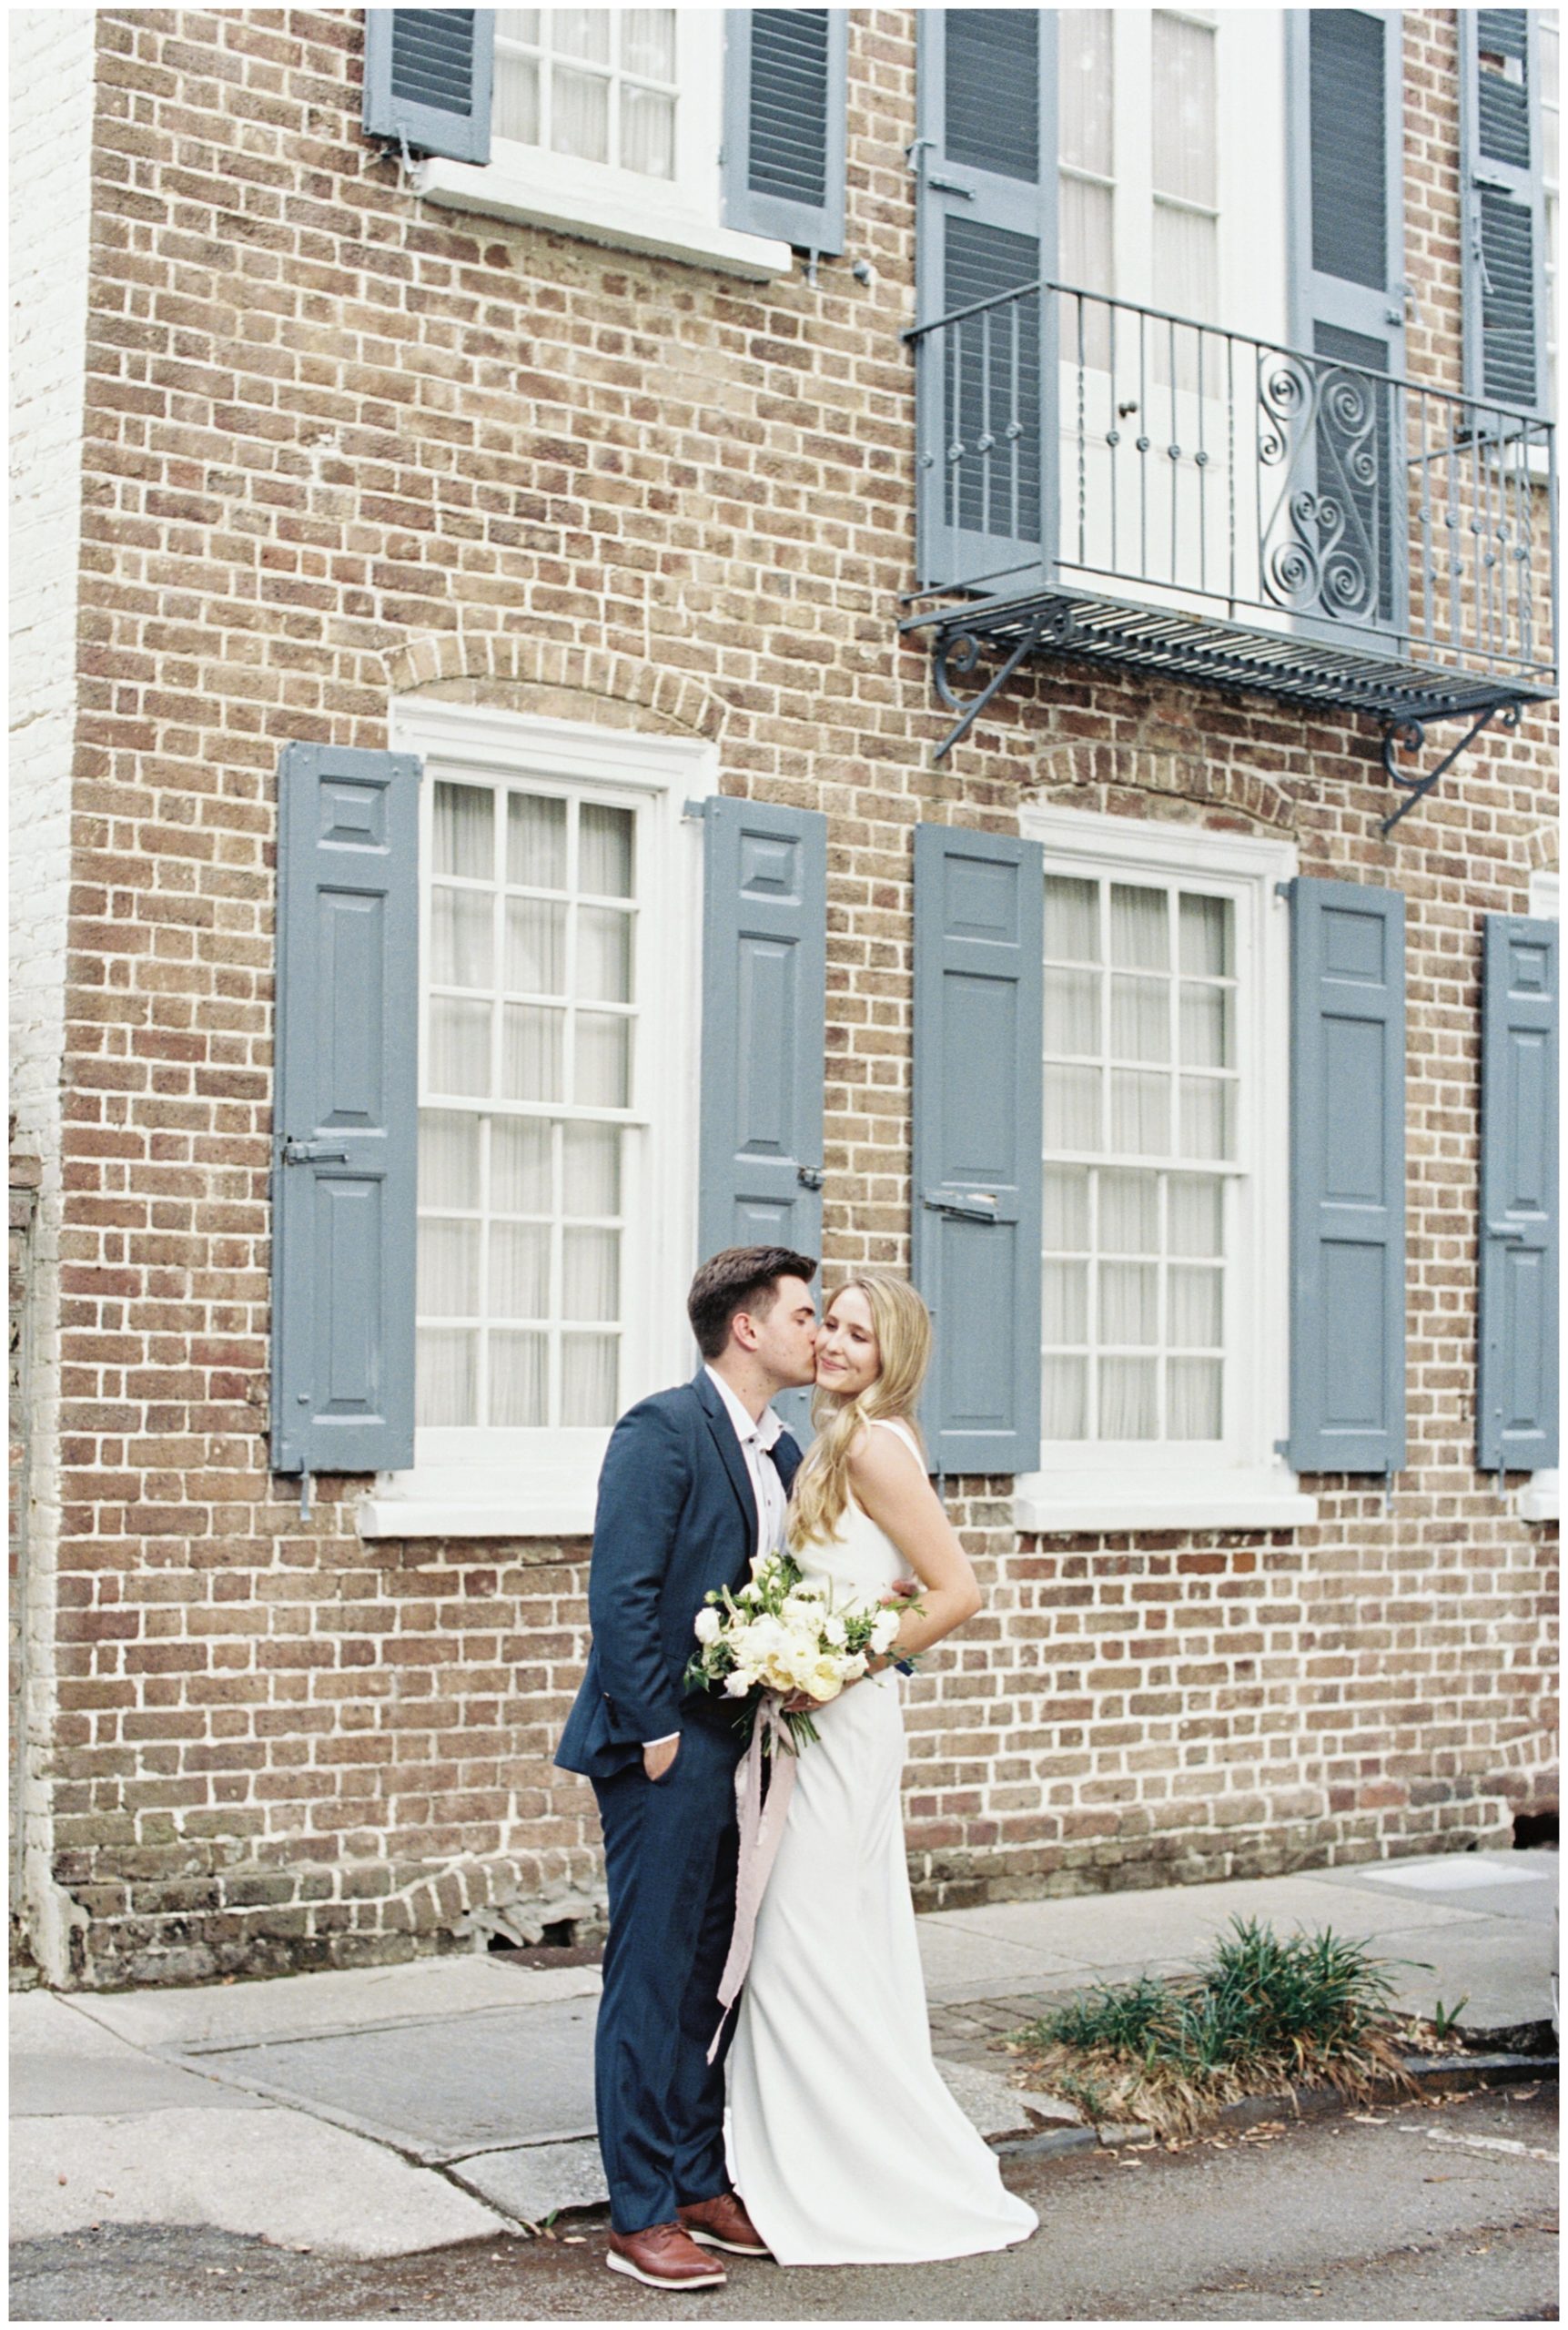 newlyweds in front of brick house with blue shutters in downtown Charleston SC